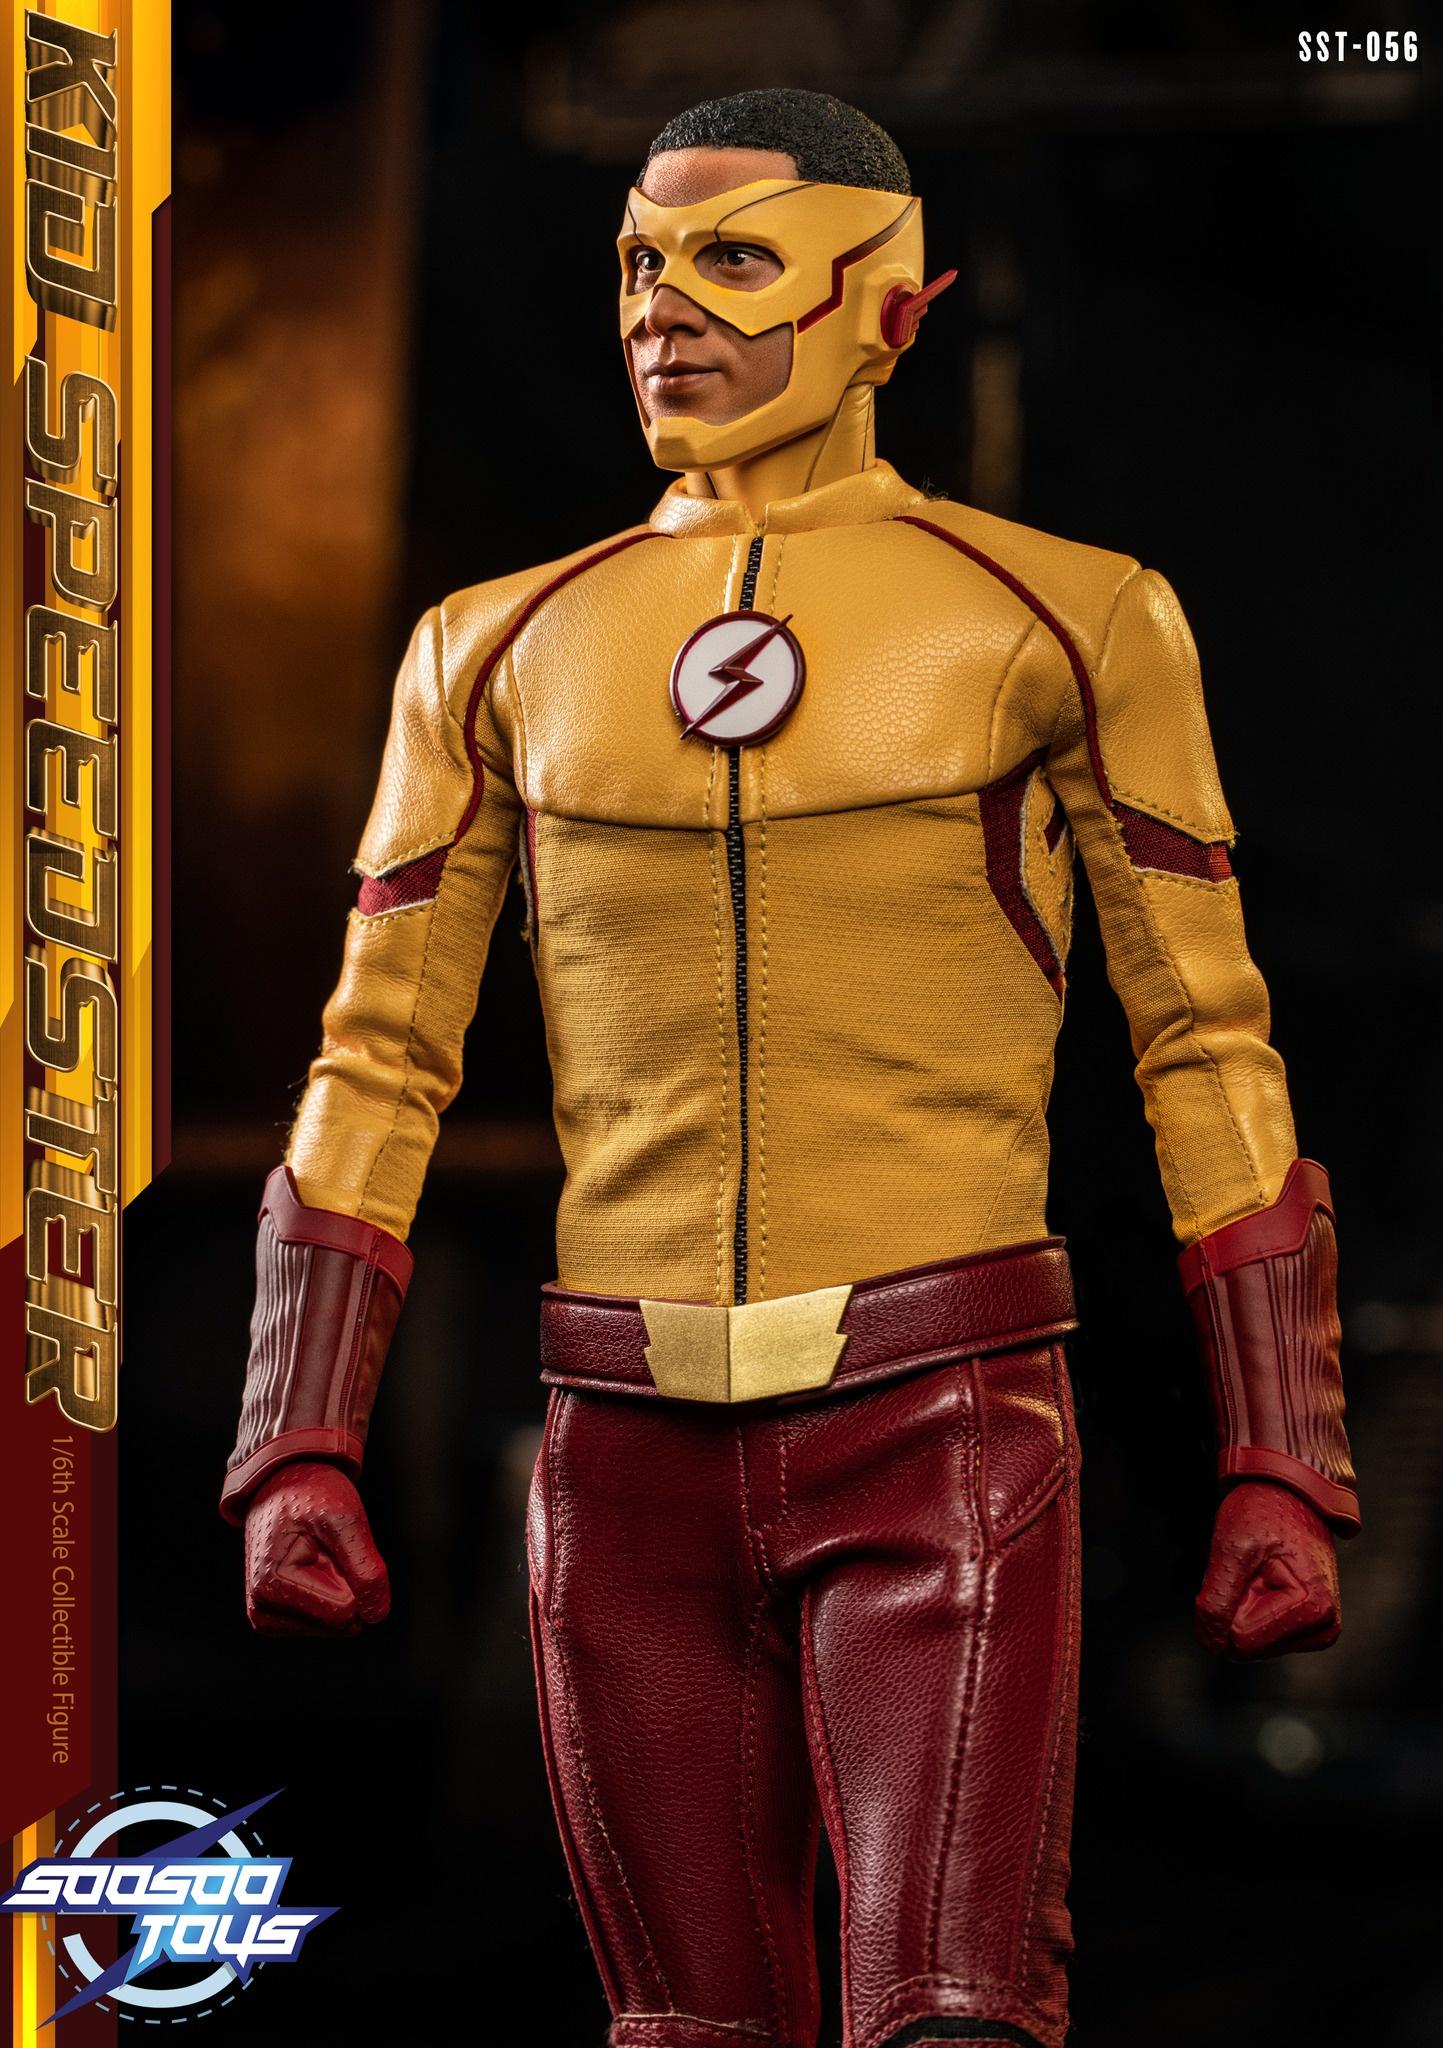 male - NEW PRODUCT: Soosootoys 1/6 scale collectible SST-056: The Kid Speedster F79394ceb02fa4af0eb4b420fc58b0b9